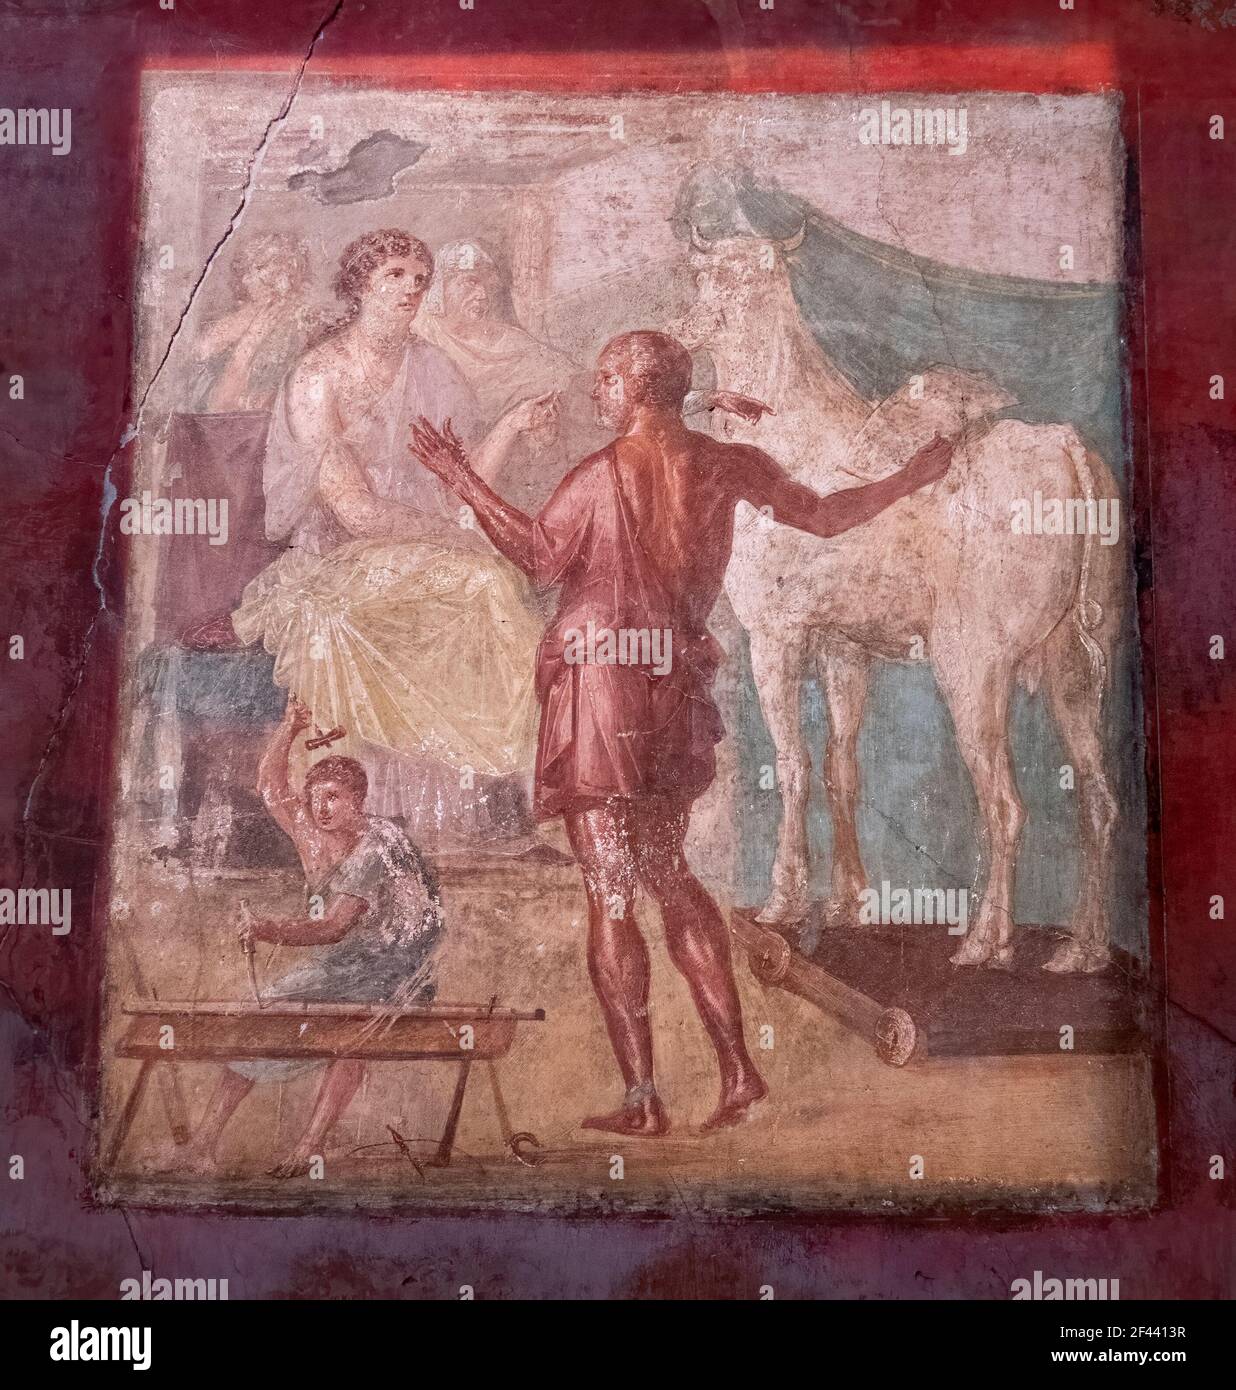 NAPLES, ITALY- JUNE, 13, 2019: NAPLES, ITALY- JUNE, 13, 2019: a fresco painting of daedalus and pasiphae in the house of the vettii in pompeii Stock Photo